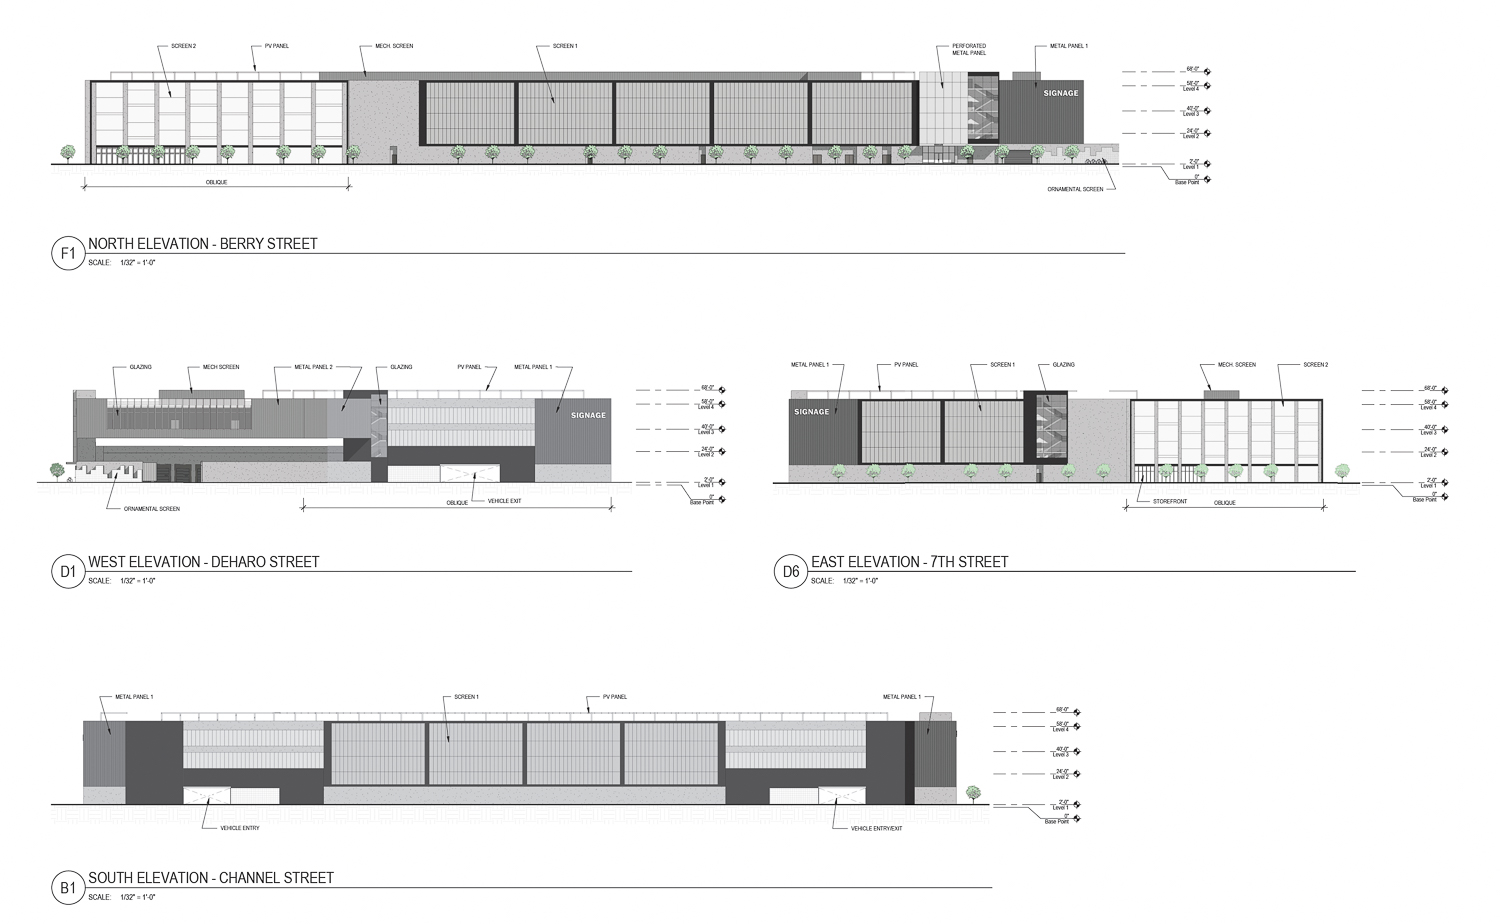 900 7th Street facade elevations, rendering by MG2